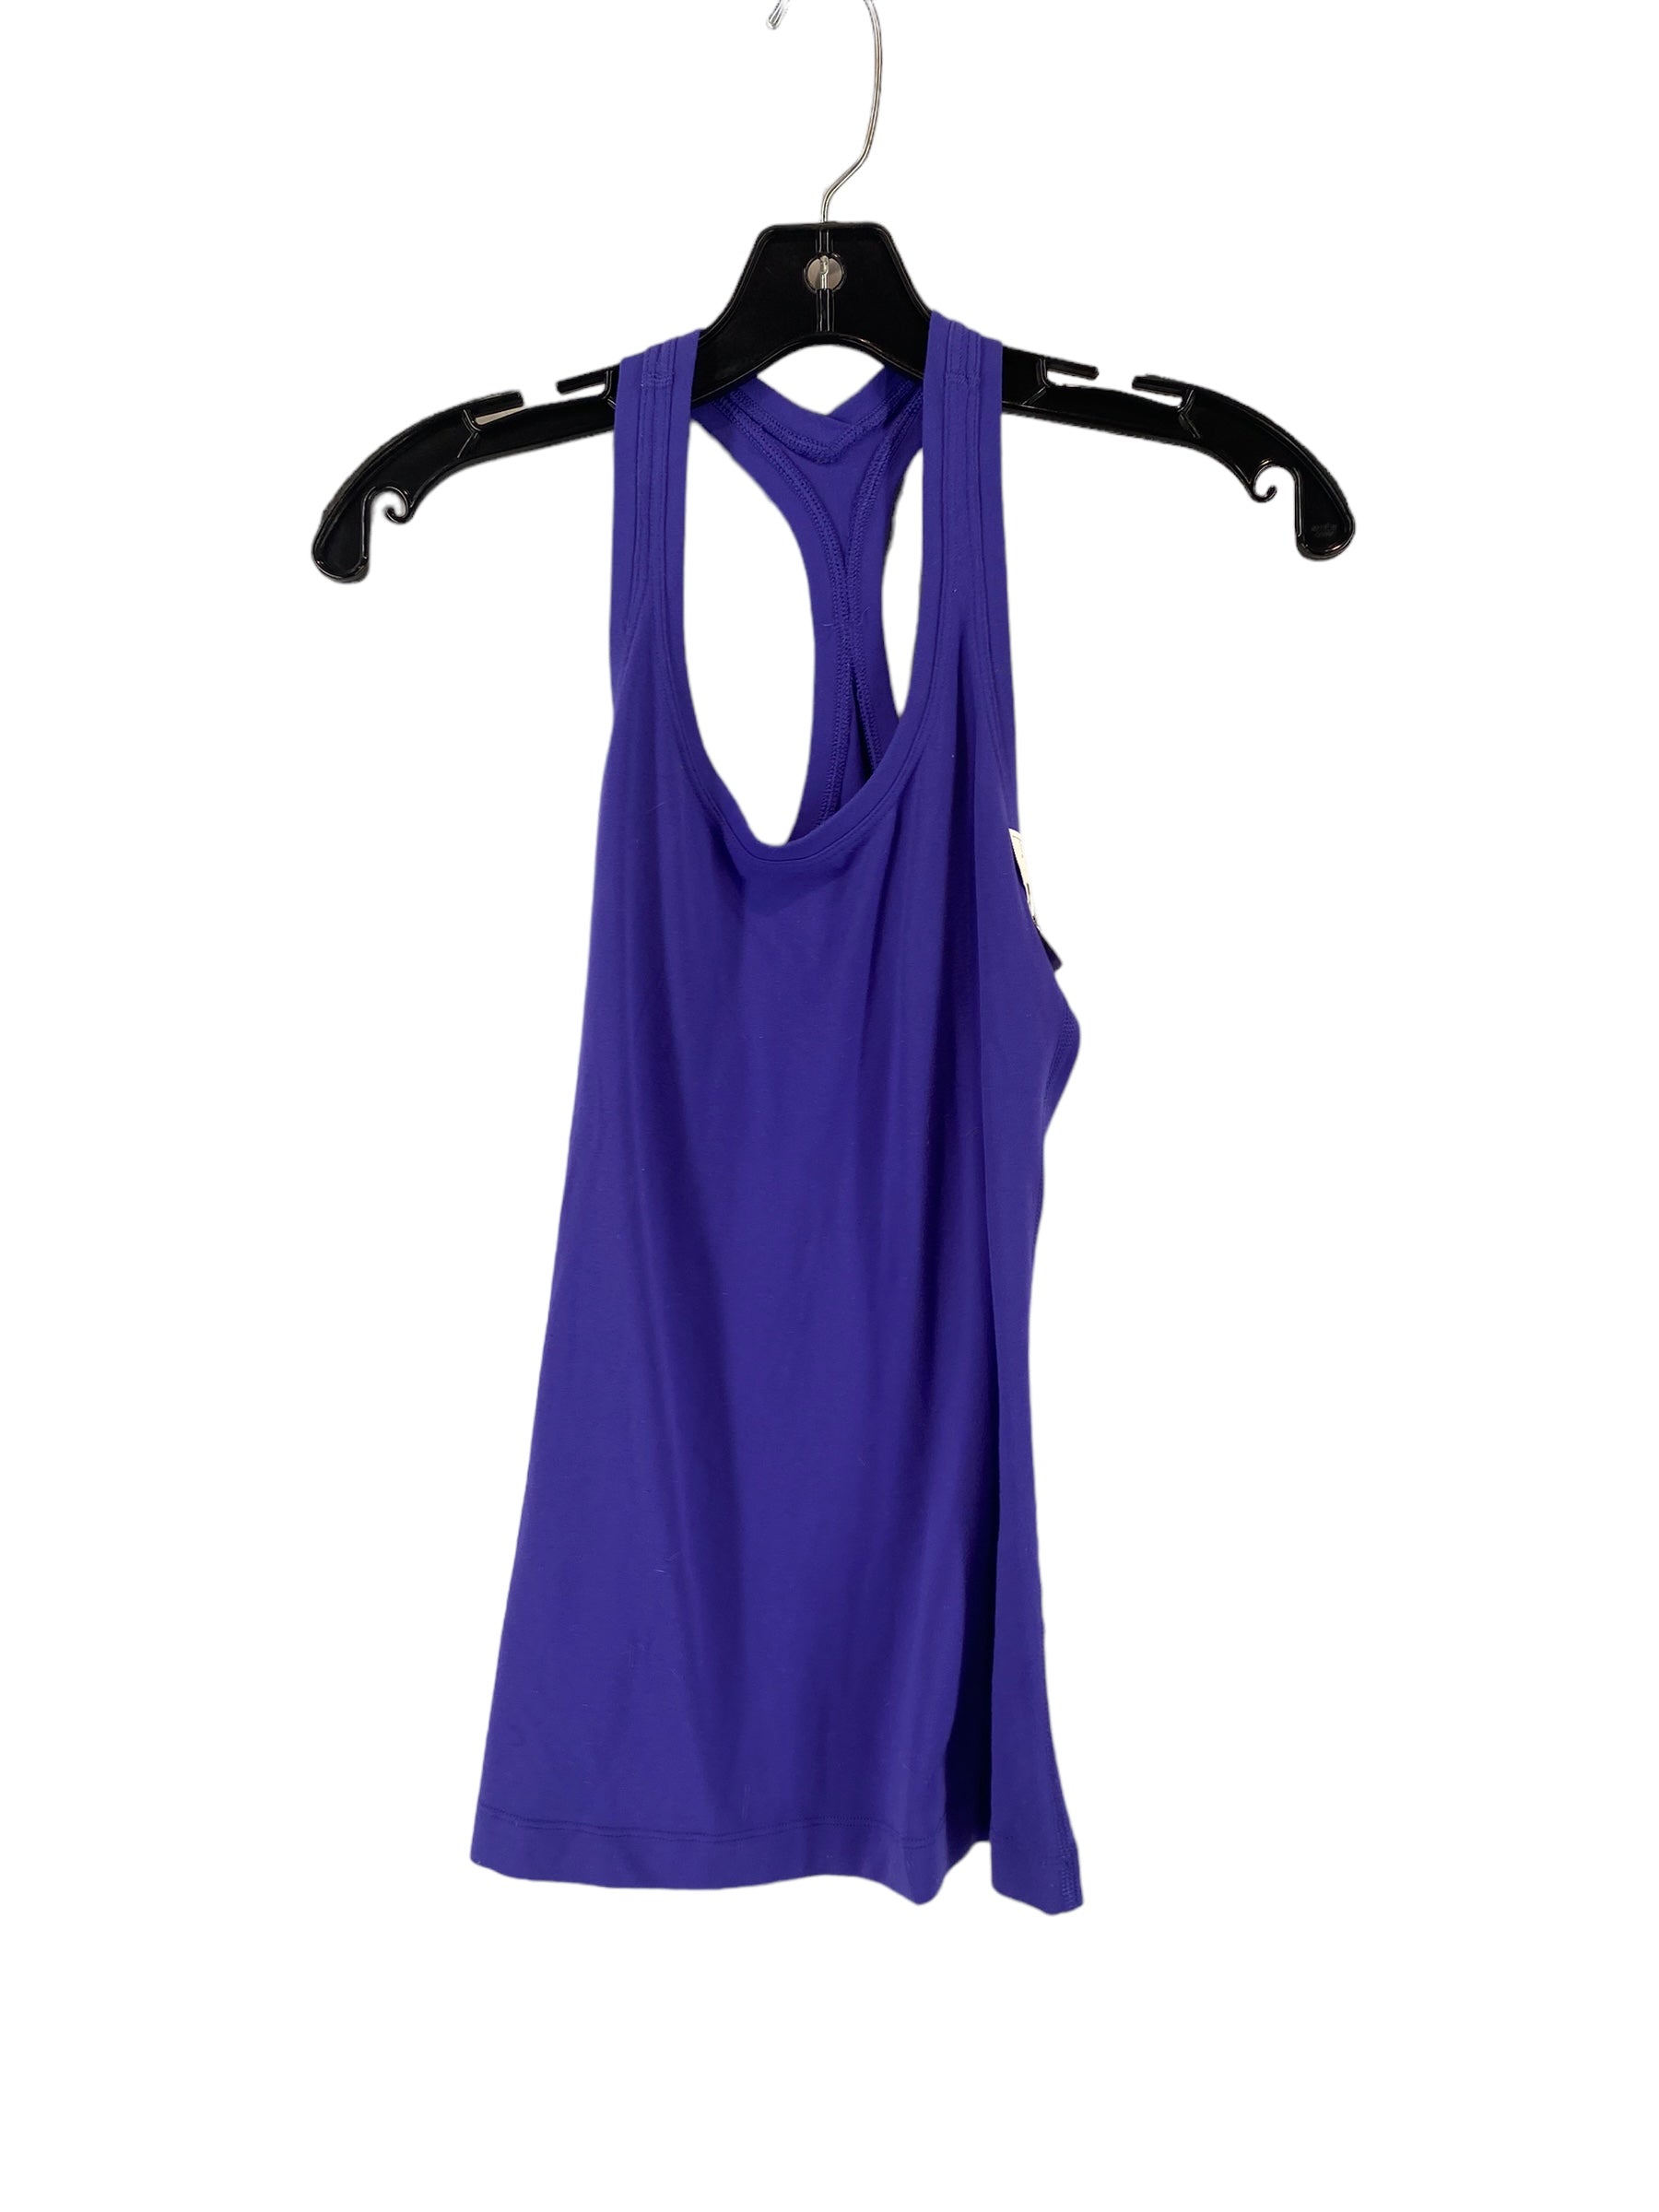 Lululemon Exquisite Sport Tank Size 4 - Violet, Women's Fashion, Activewear  on Carousell